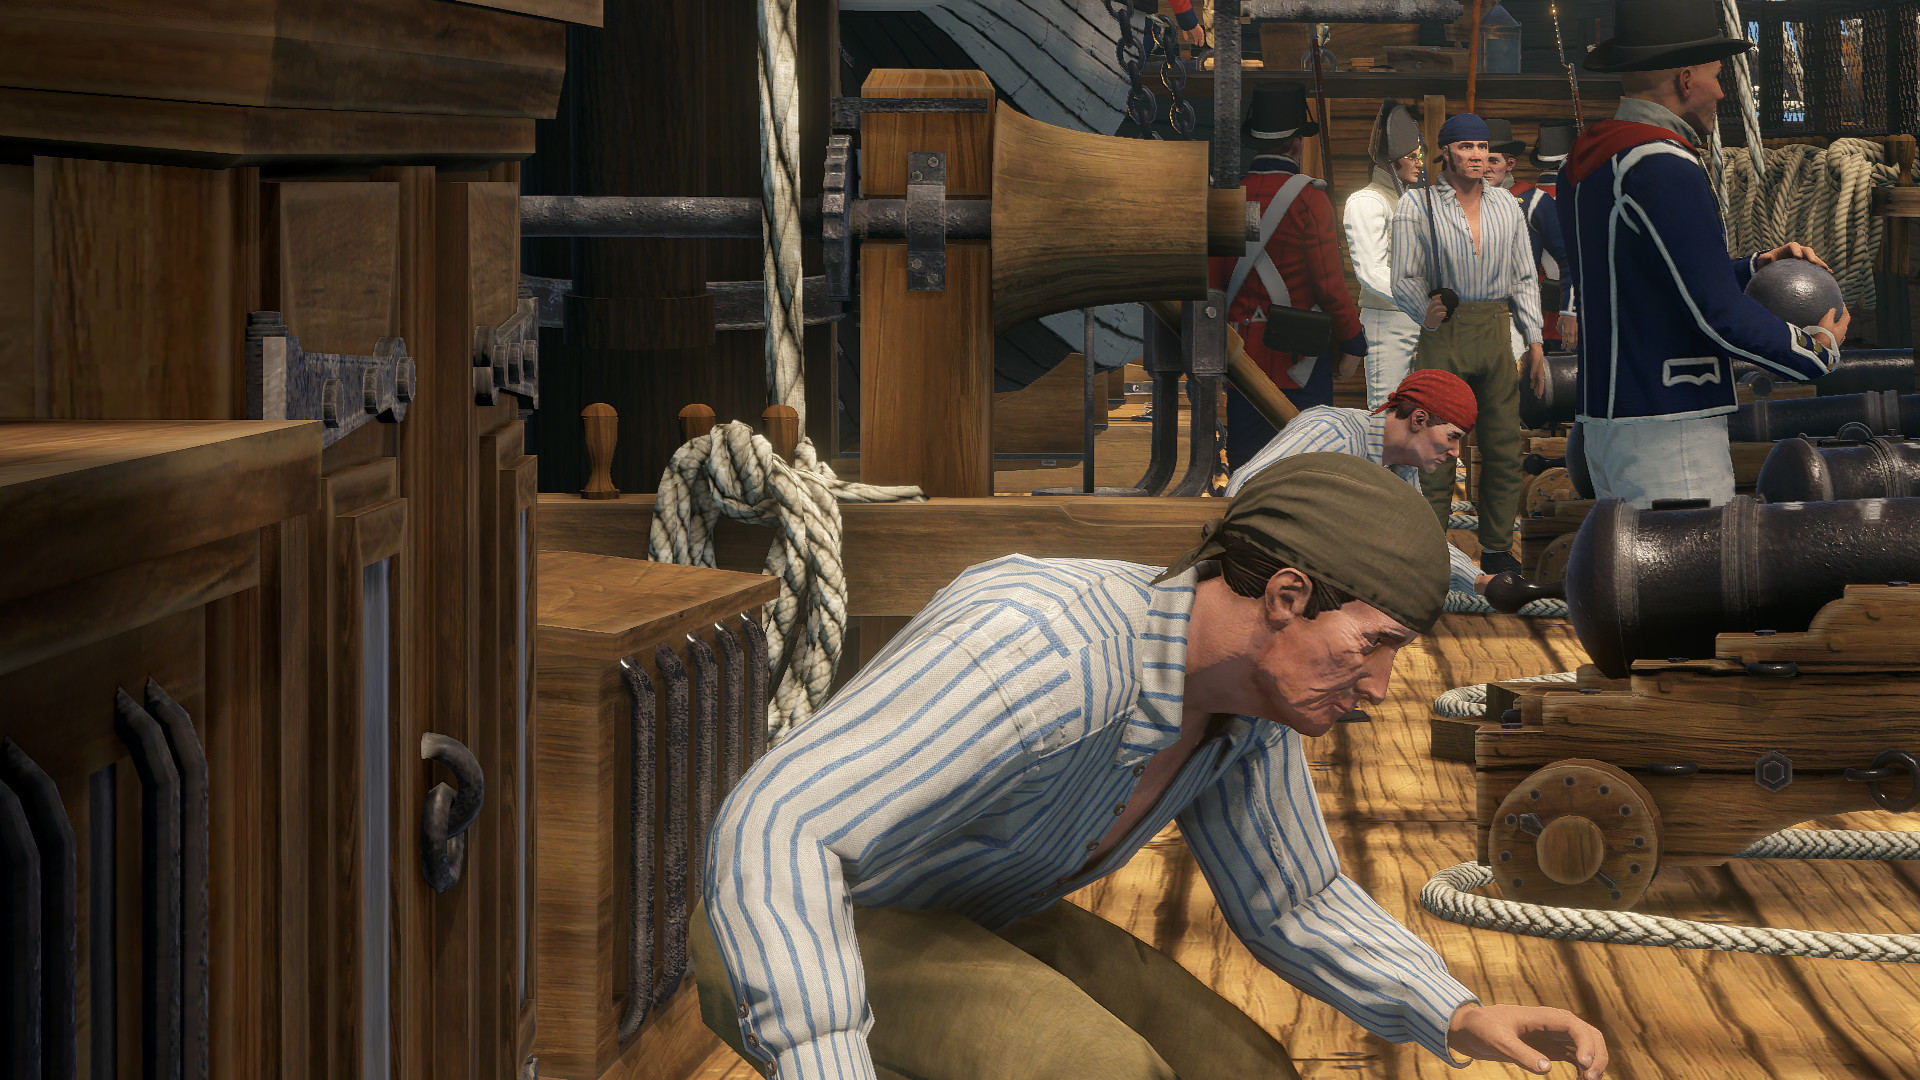 Screenshot from Holdfast: Nations At War, an online multiplayer shooter set in Napoleon and WWI